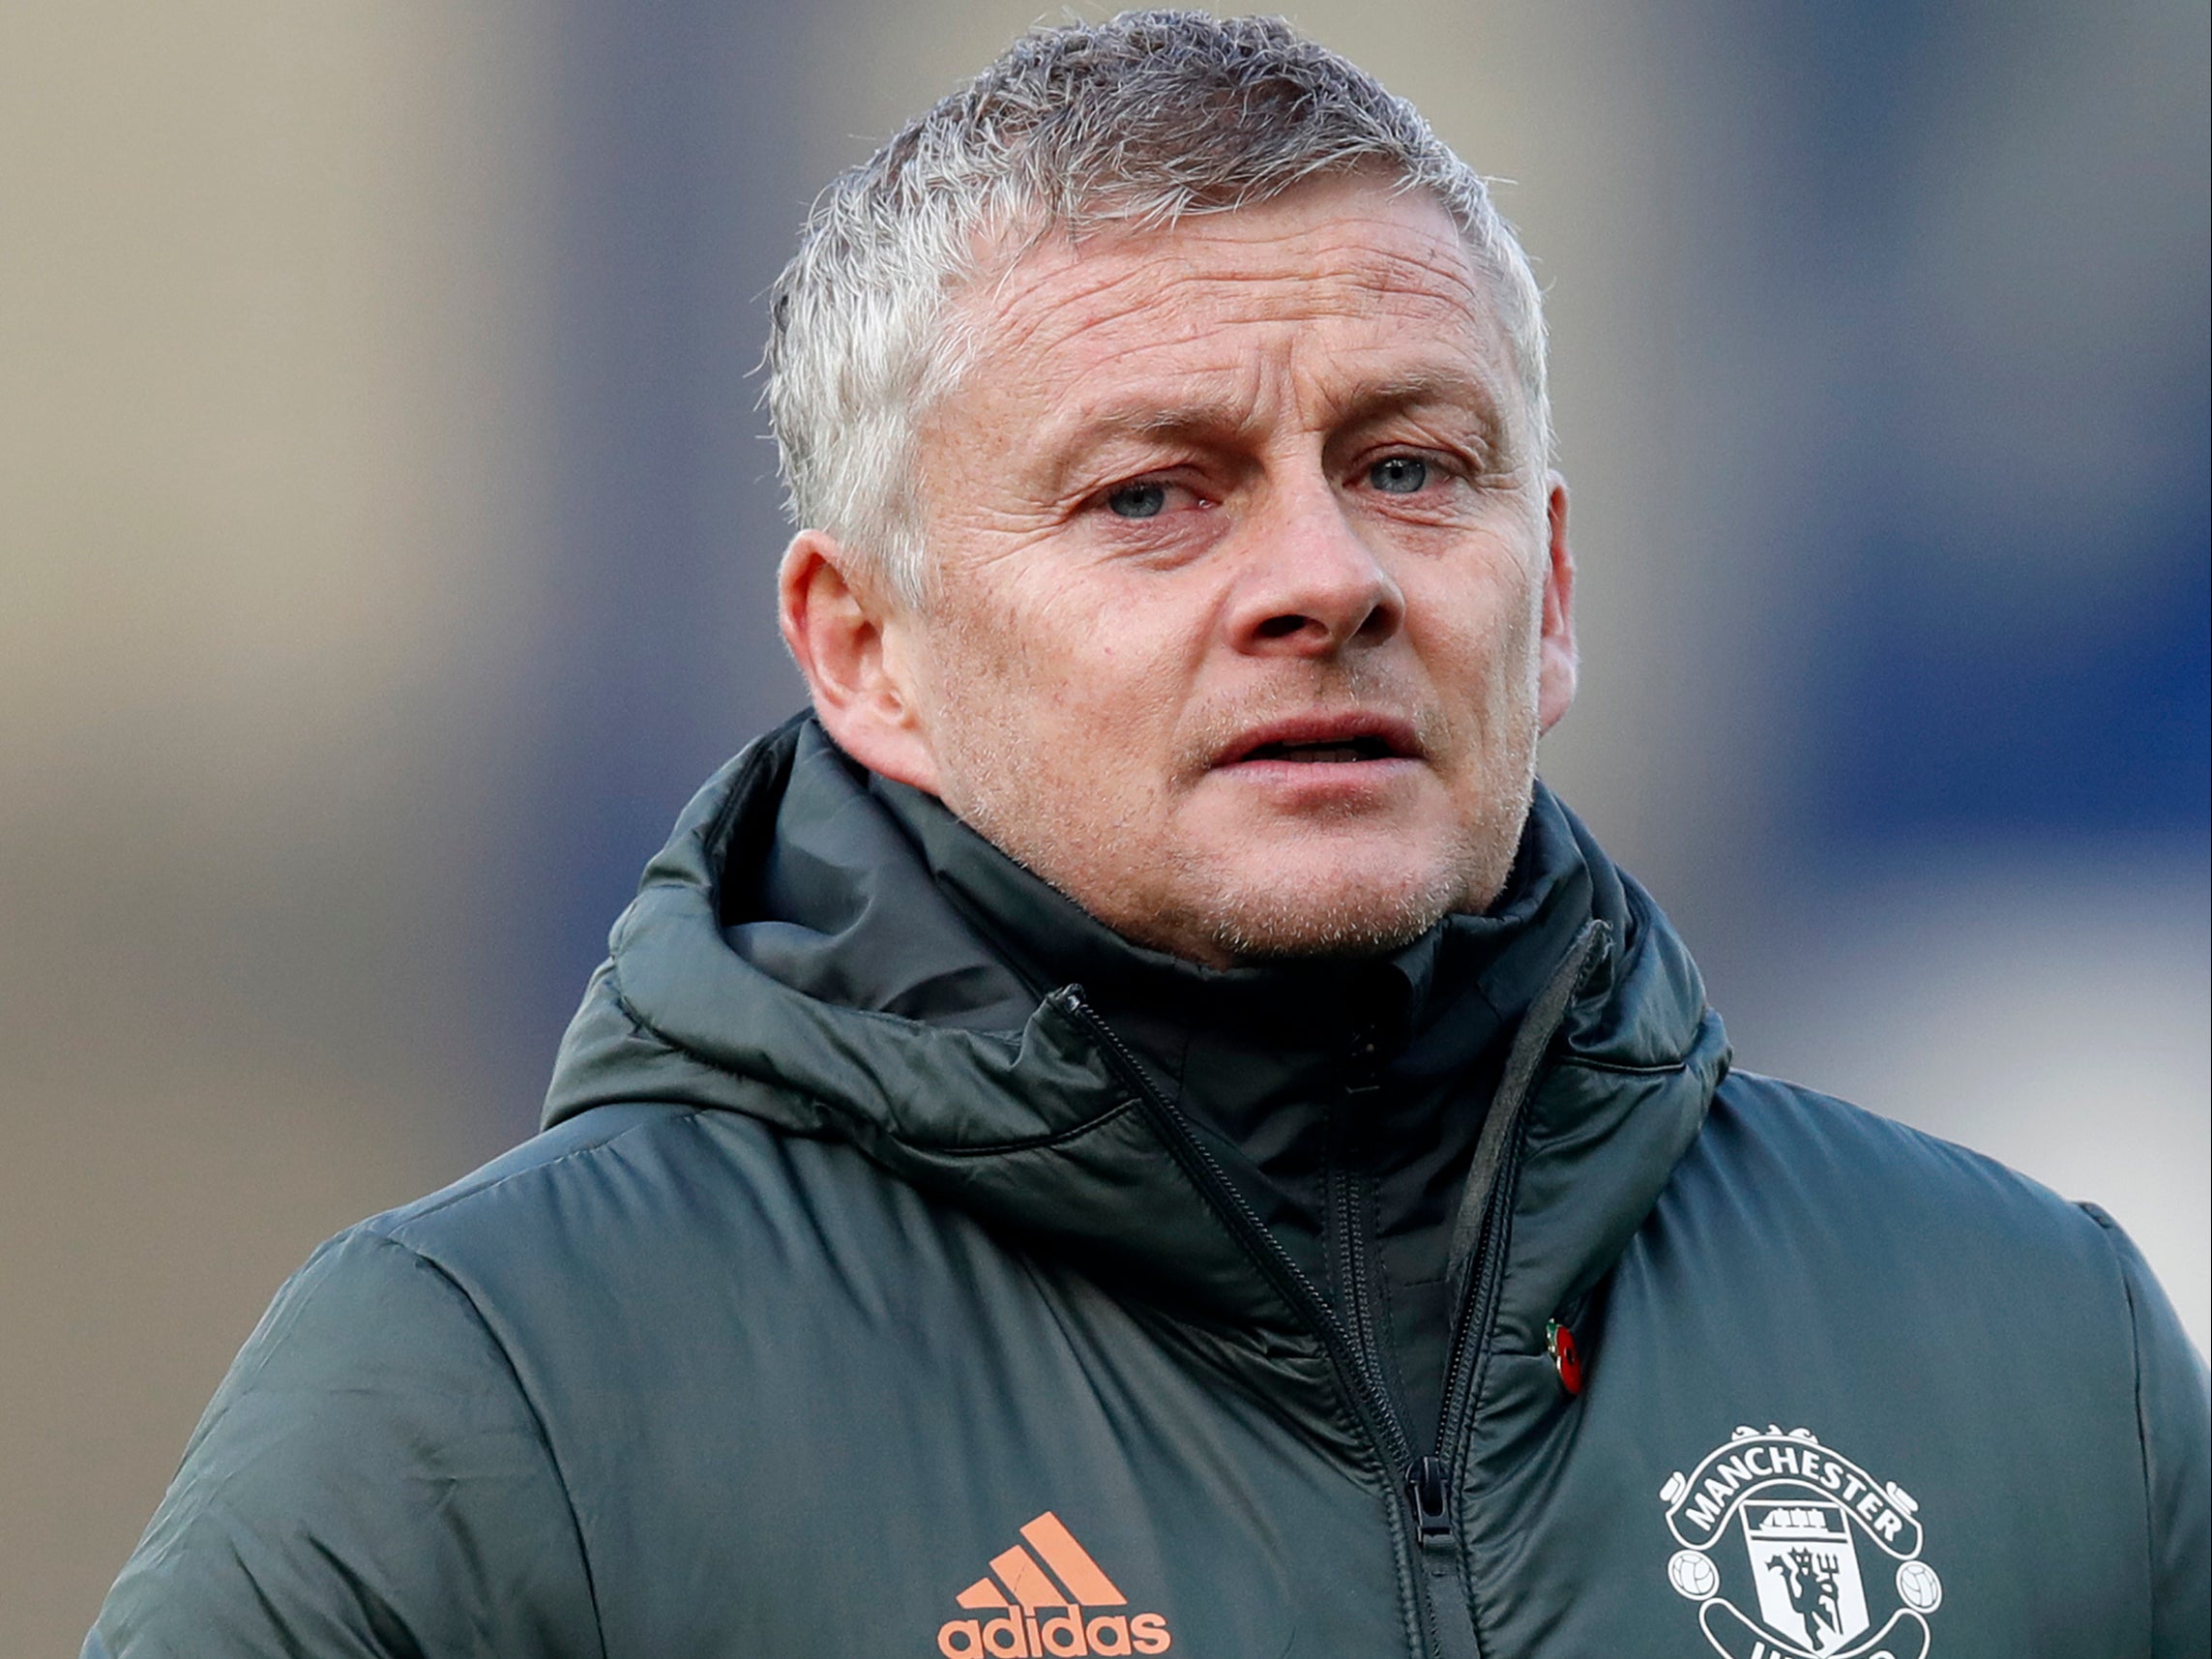 Manchester United’s Ole Gunnar Solskjaer is one of a number of managers complaining about the fixture list this season